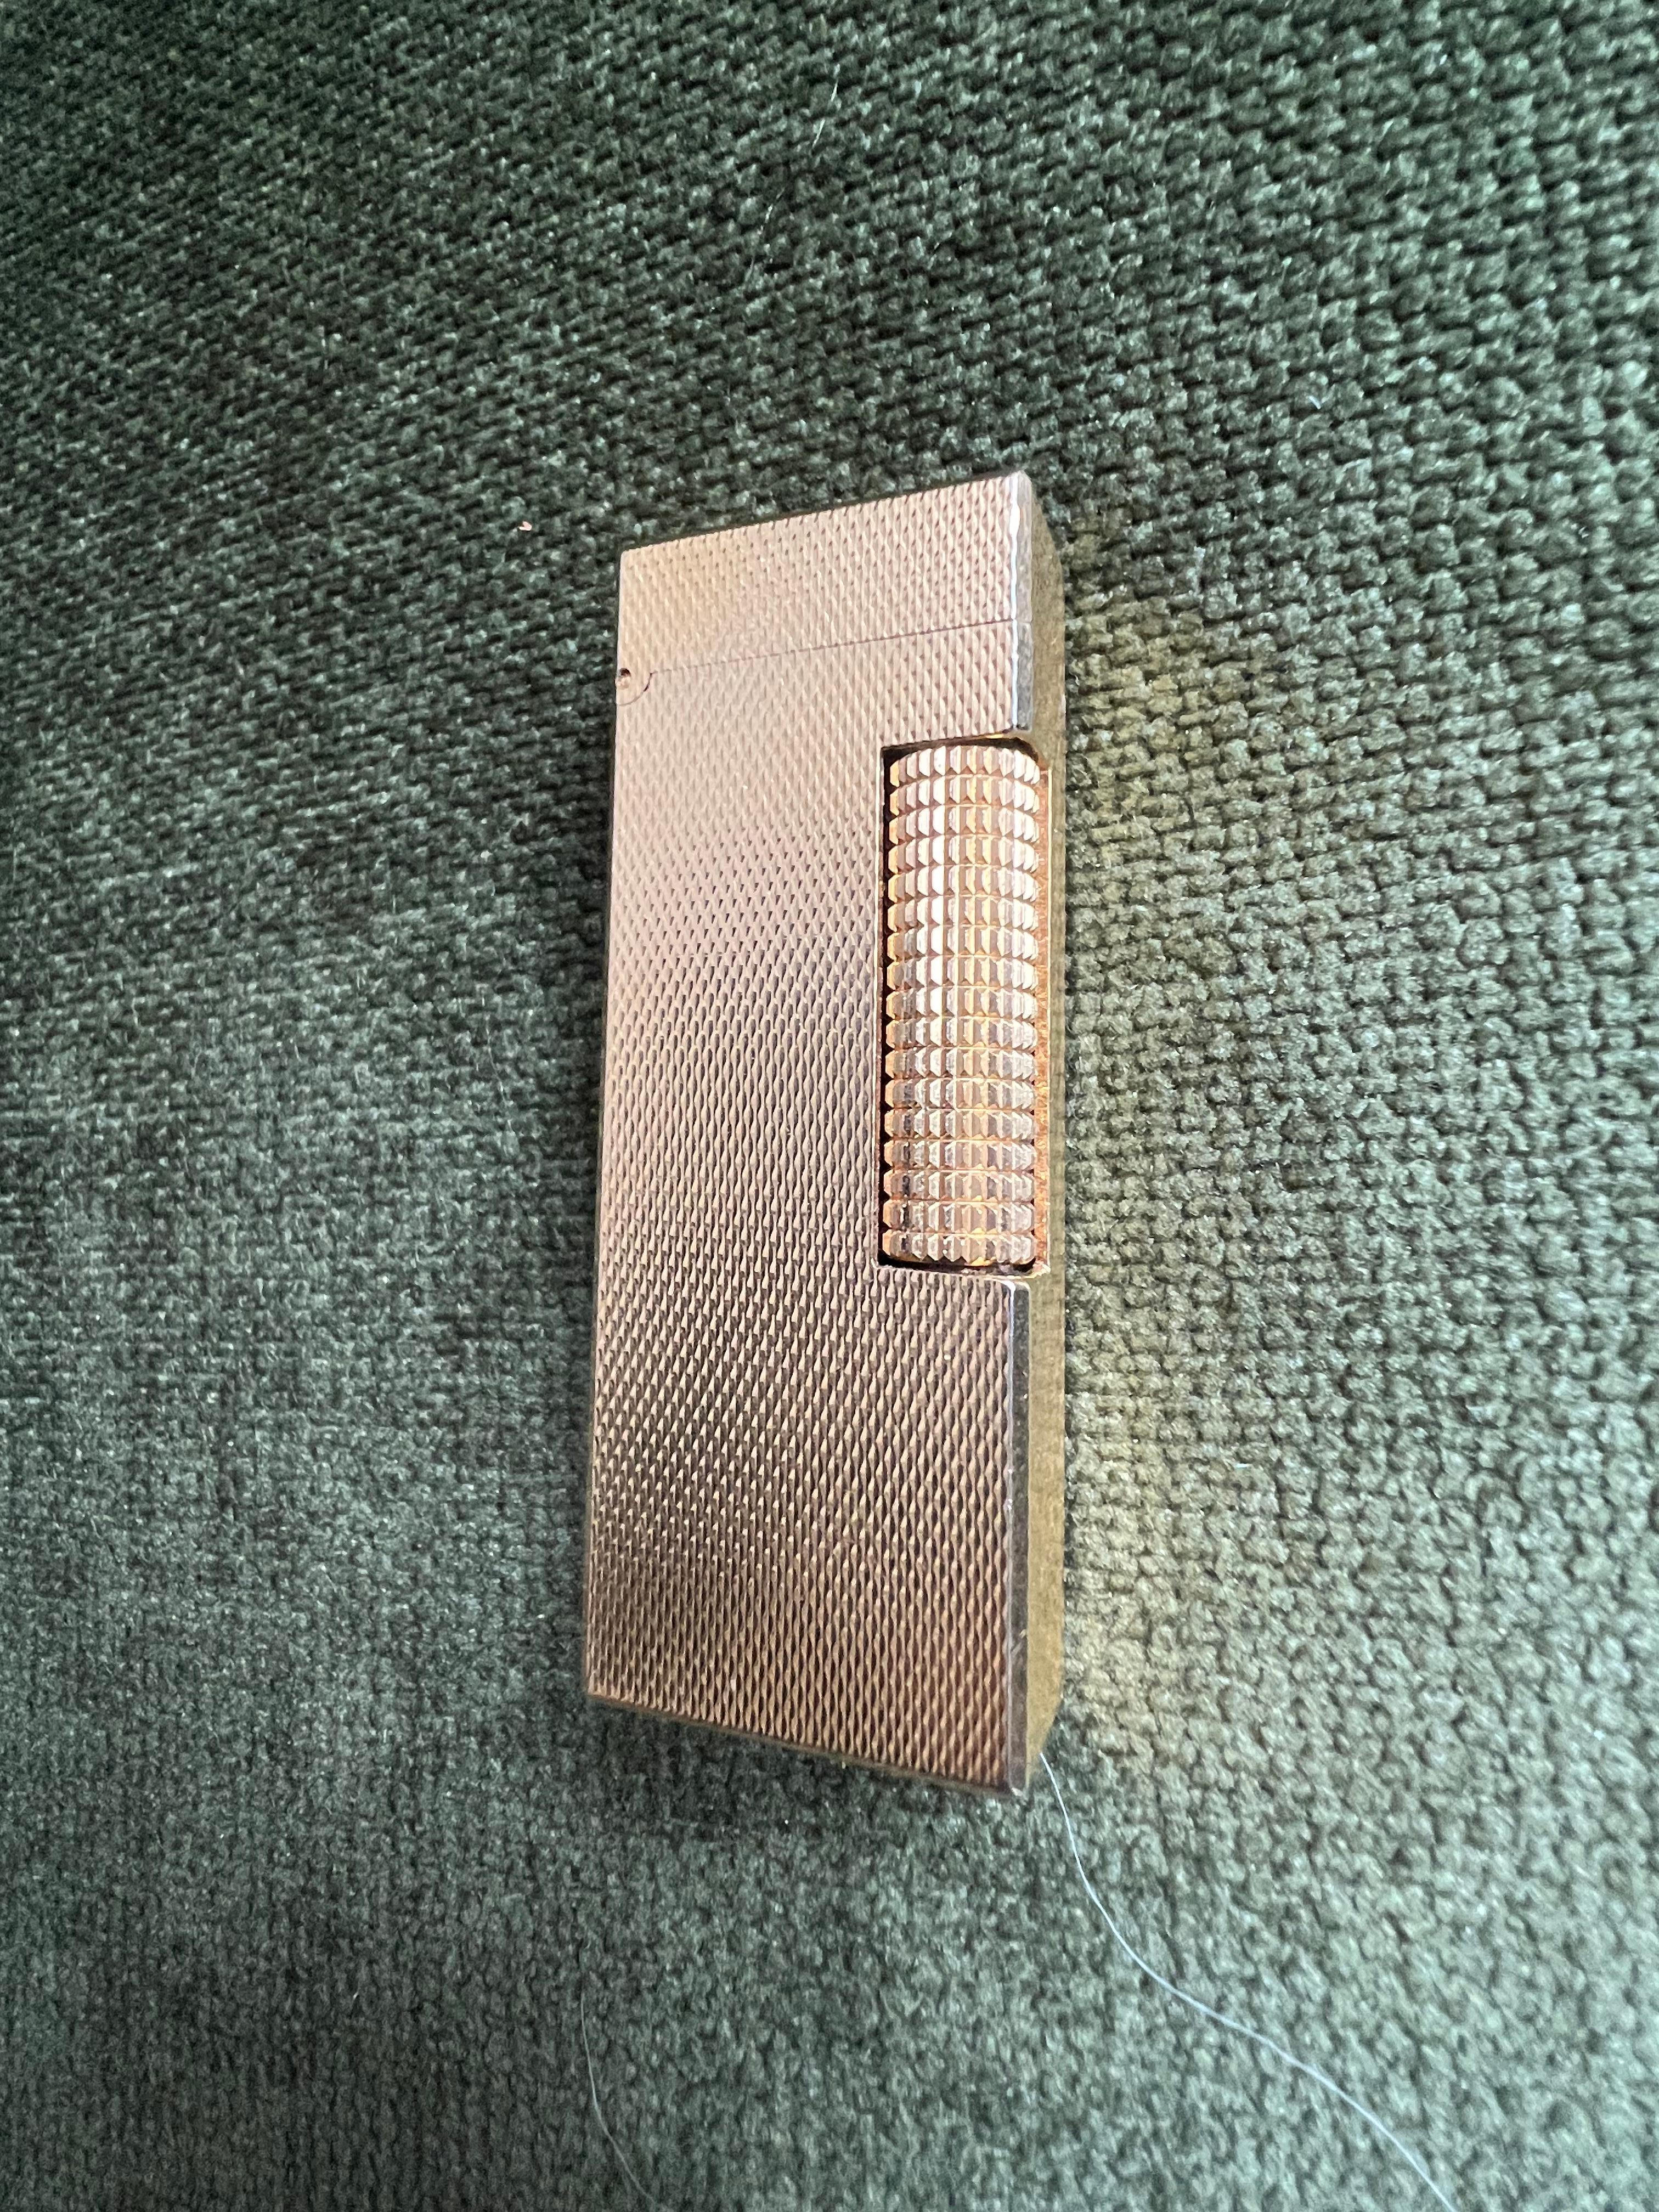 The James Bond Iconic and Rare Vintage Dunhill Gold and Swiss Made Lighter 3